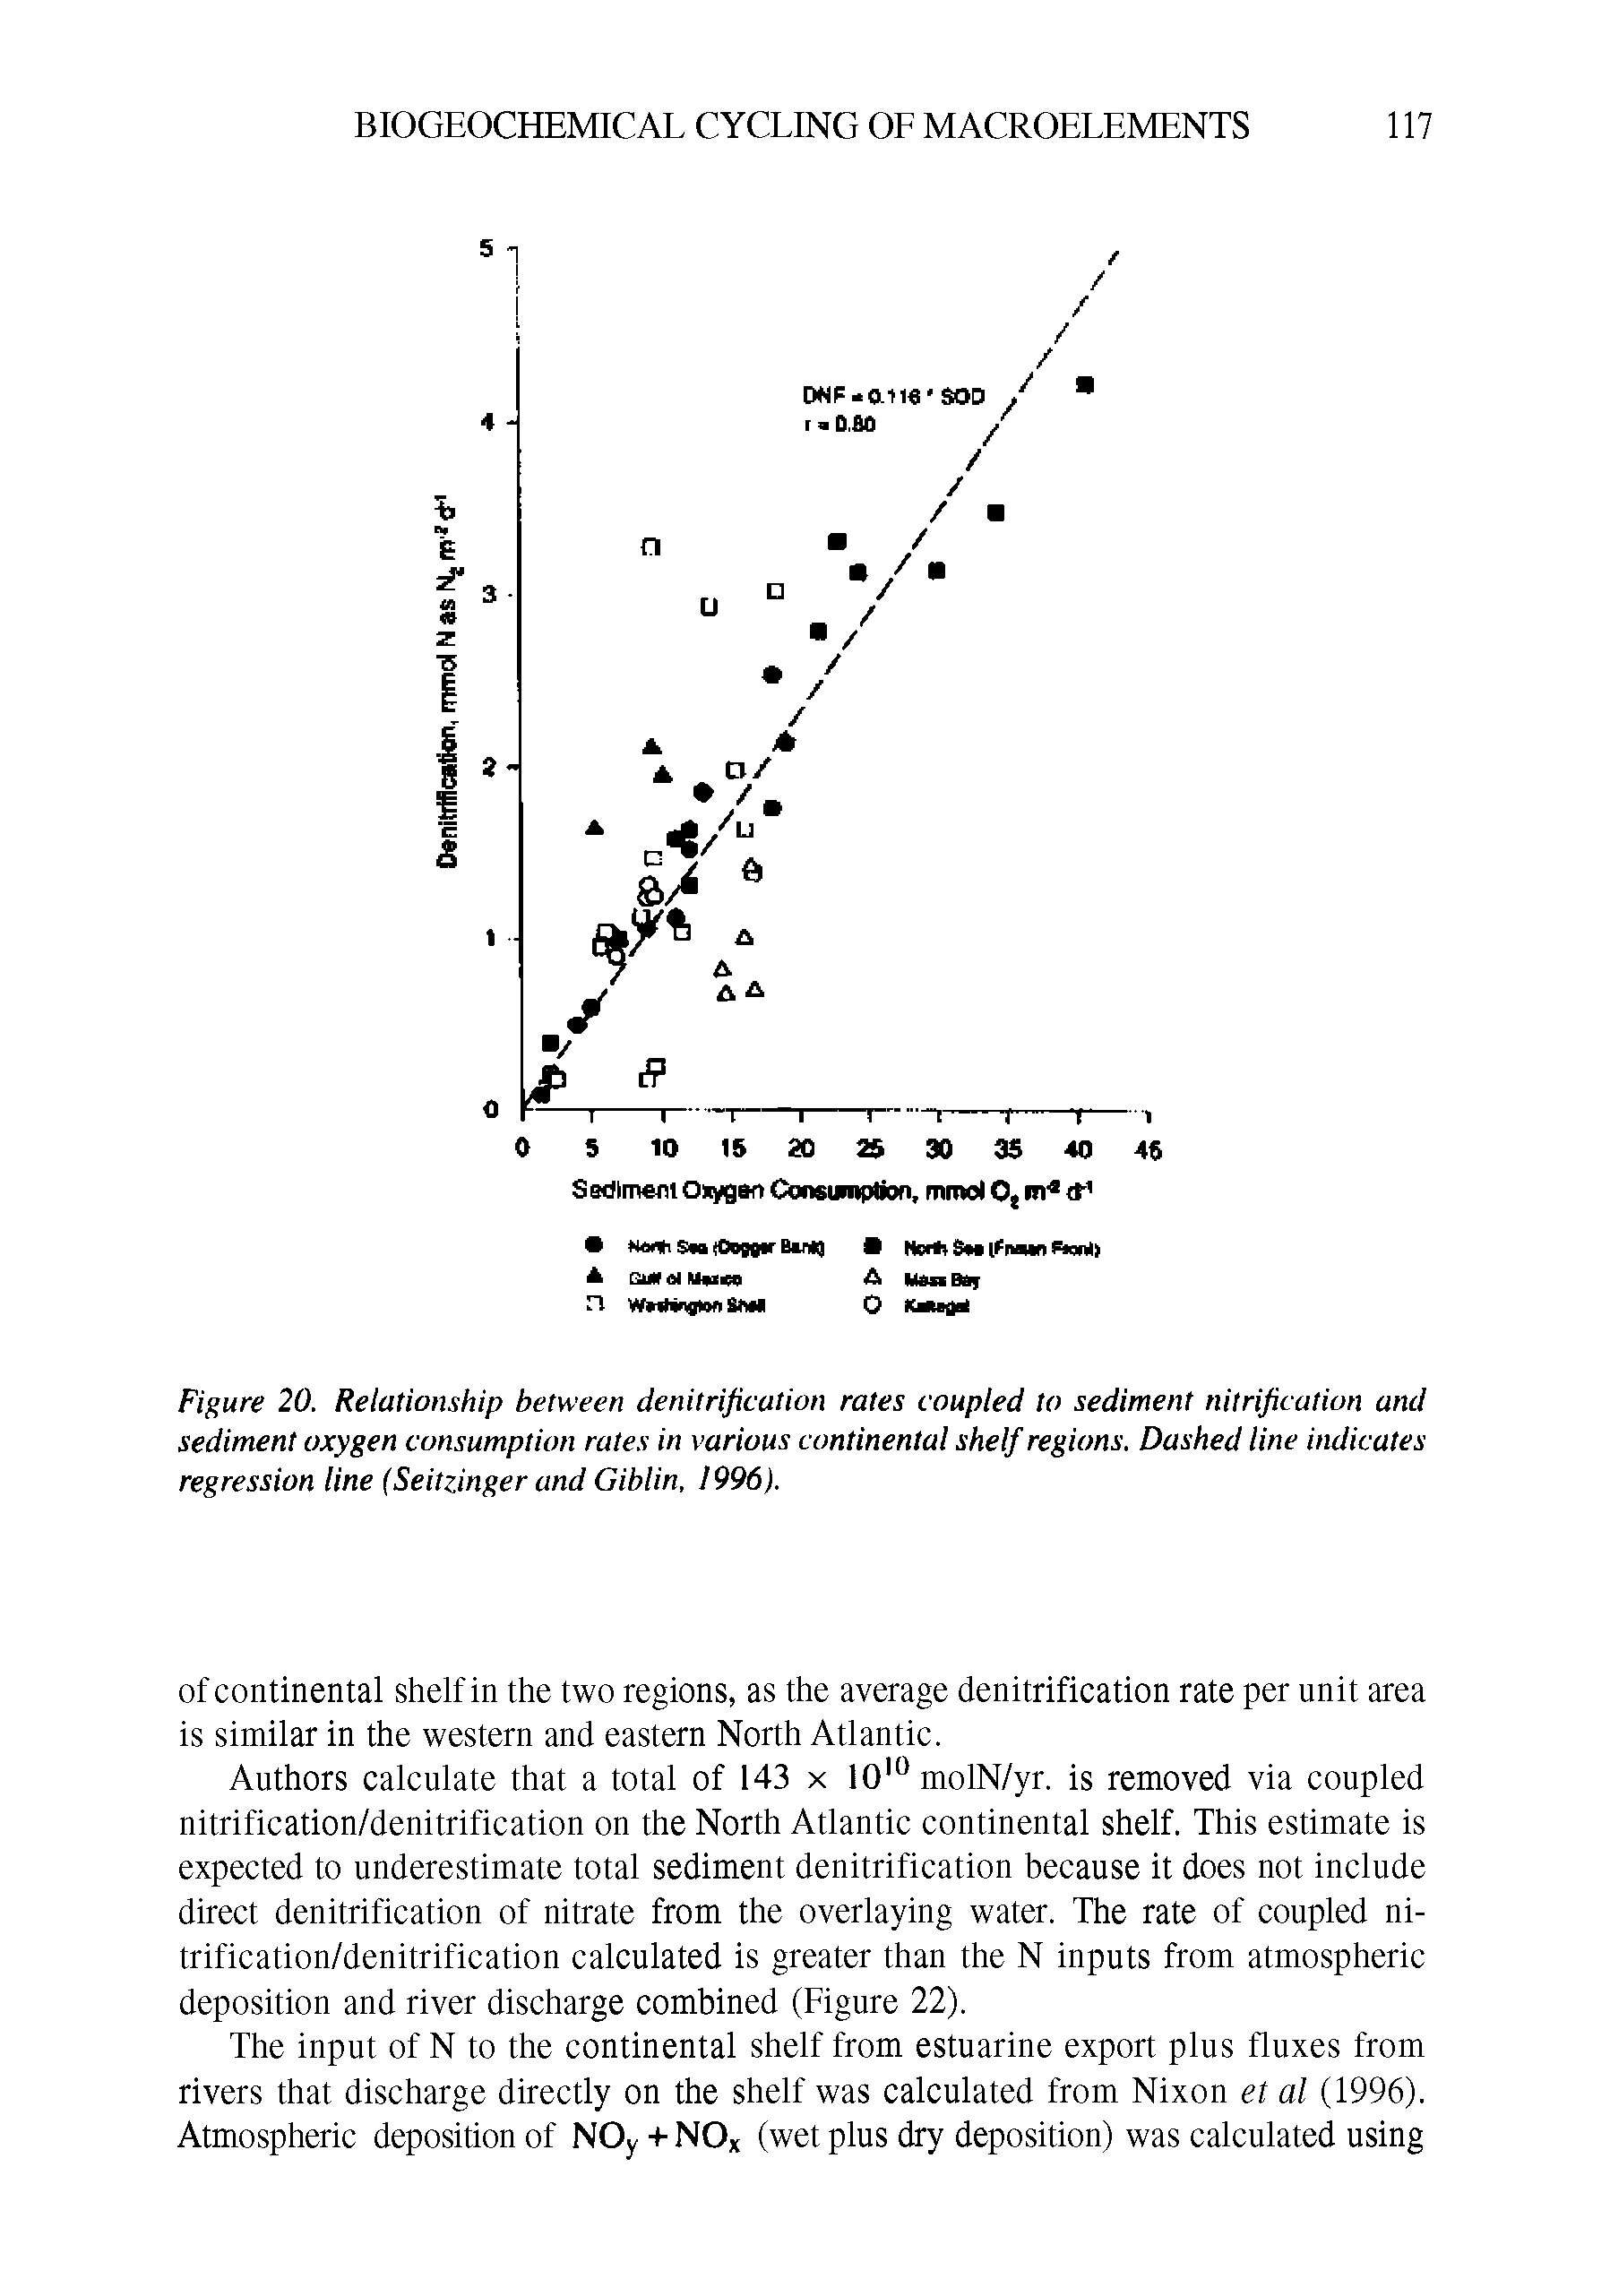 Figure 20. Relatiomhip between denitrification rates coupled to sediment nitrification and sediment oxygen consumption rates in various continental shelf regions. Dashed line indicates regression line (Seitzinger and Giblin, 1996).